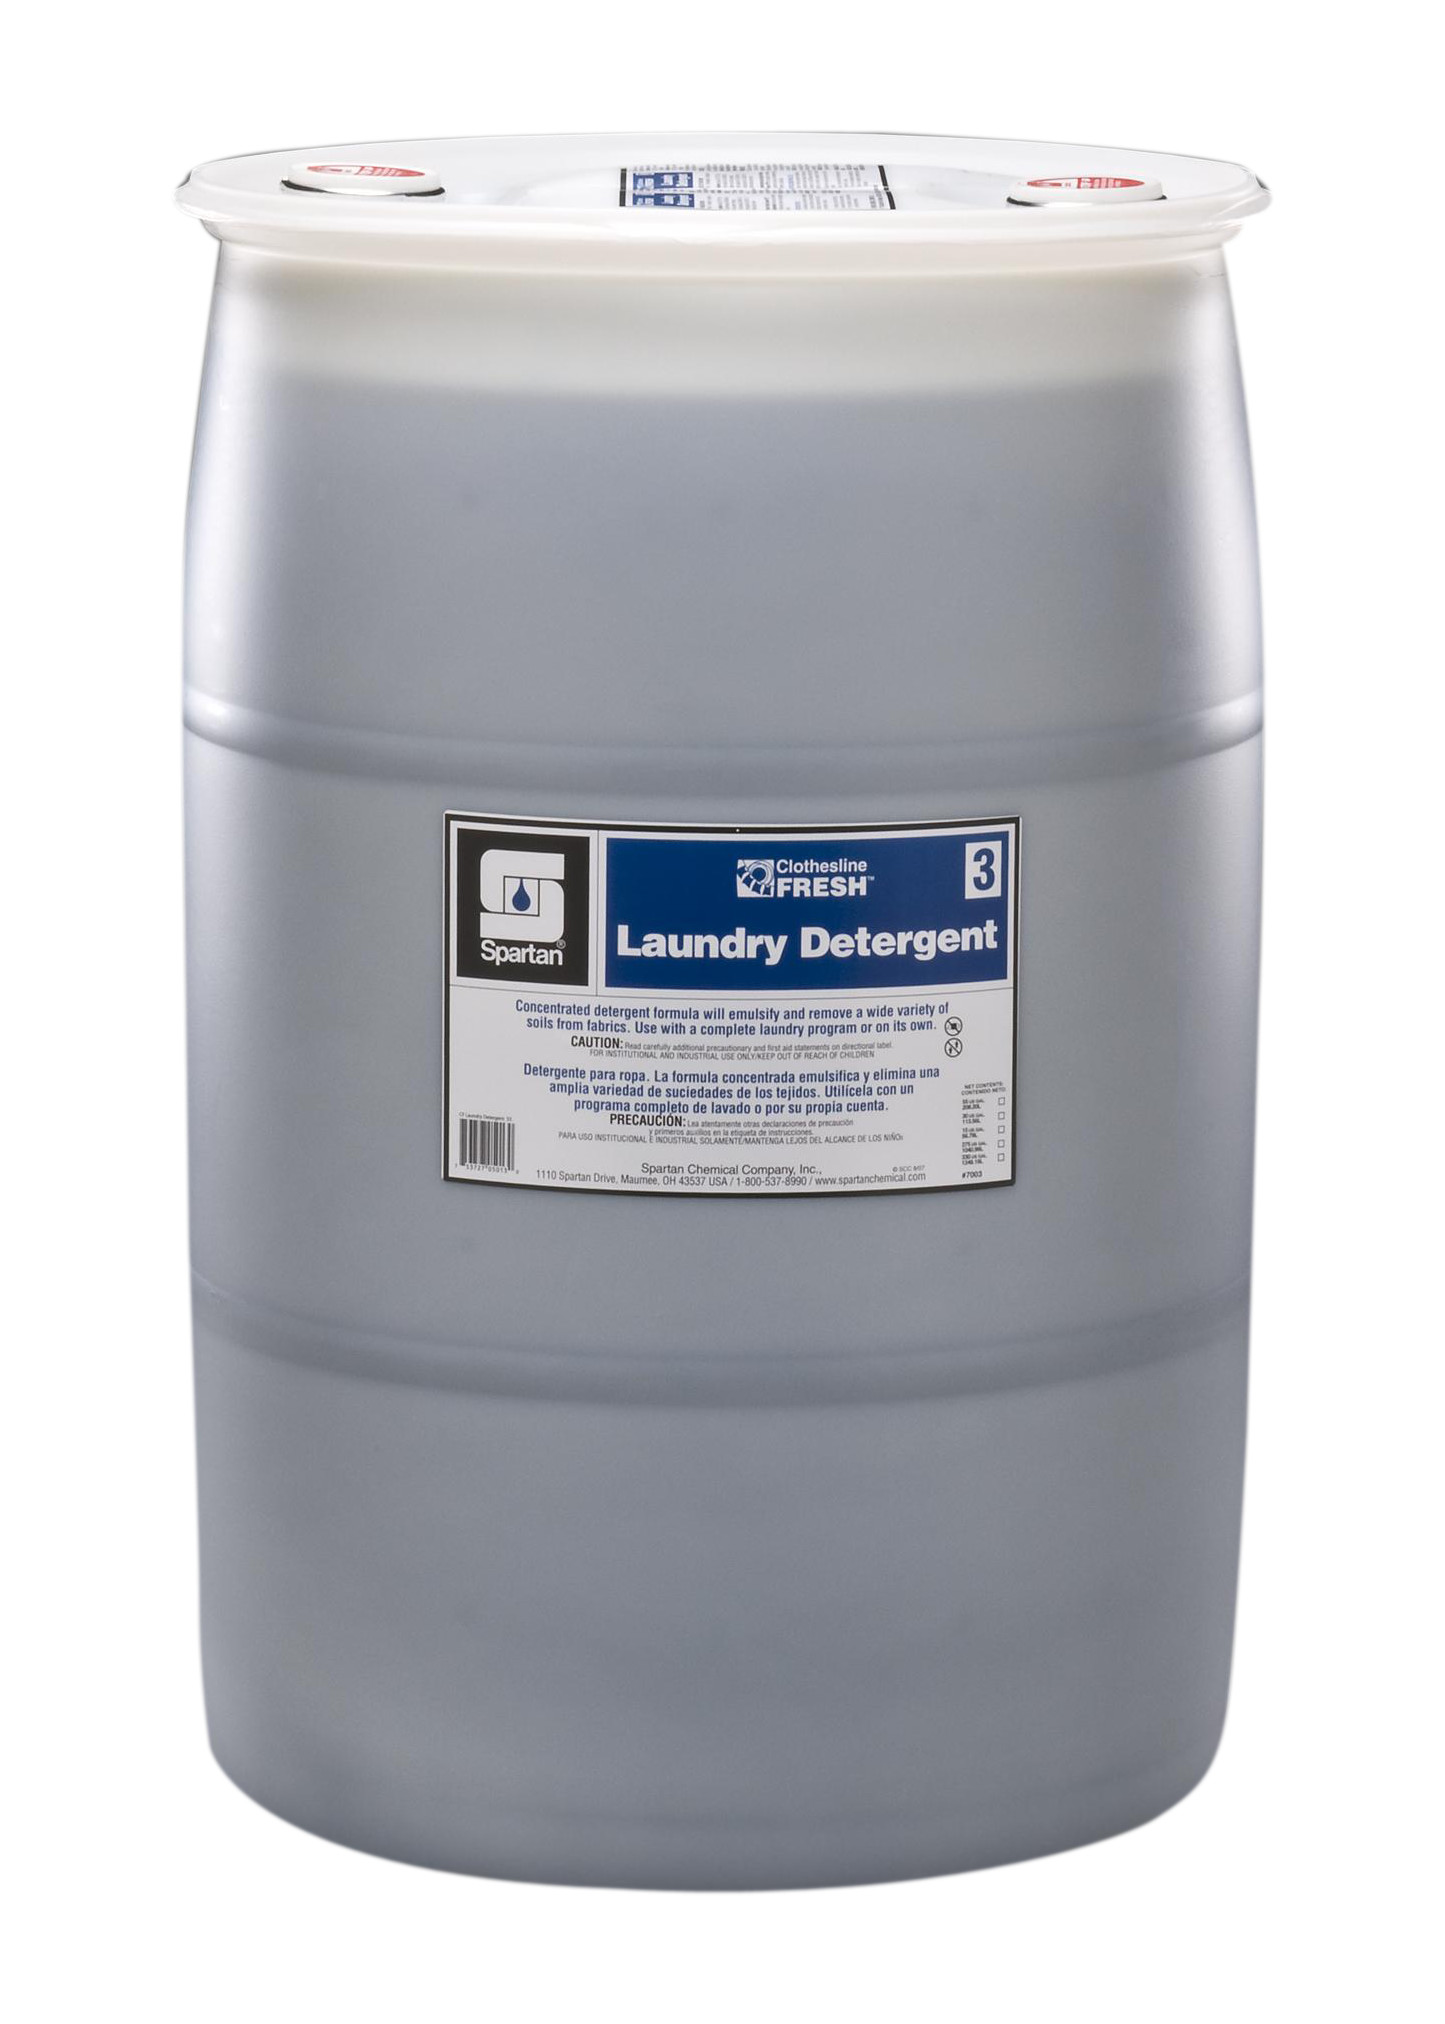 Spartan Chemical Company Clothesline Fresh Laundry Detergent 3, 55 GAL DRUM